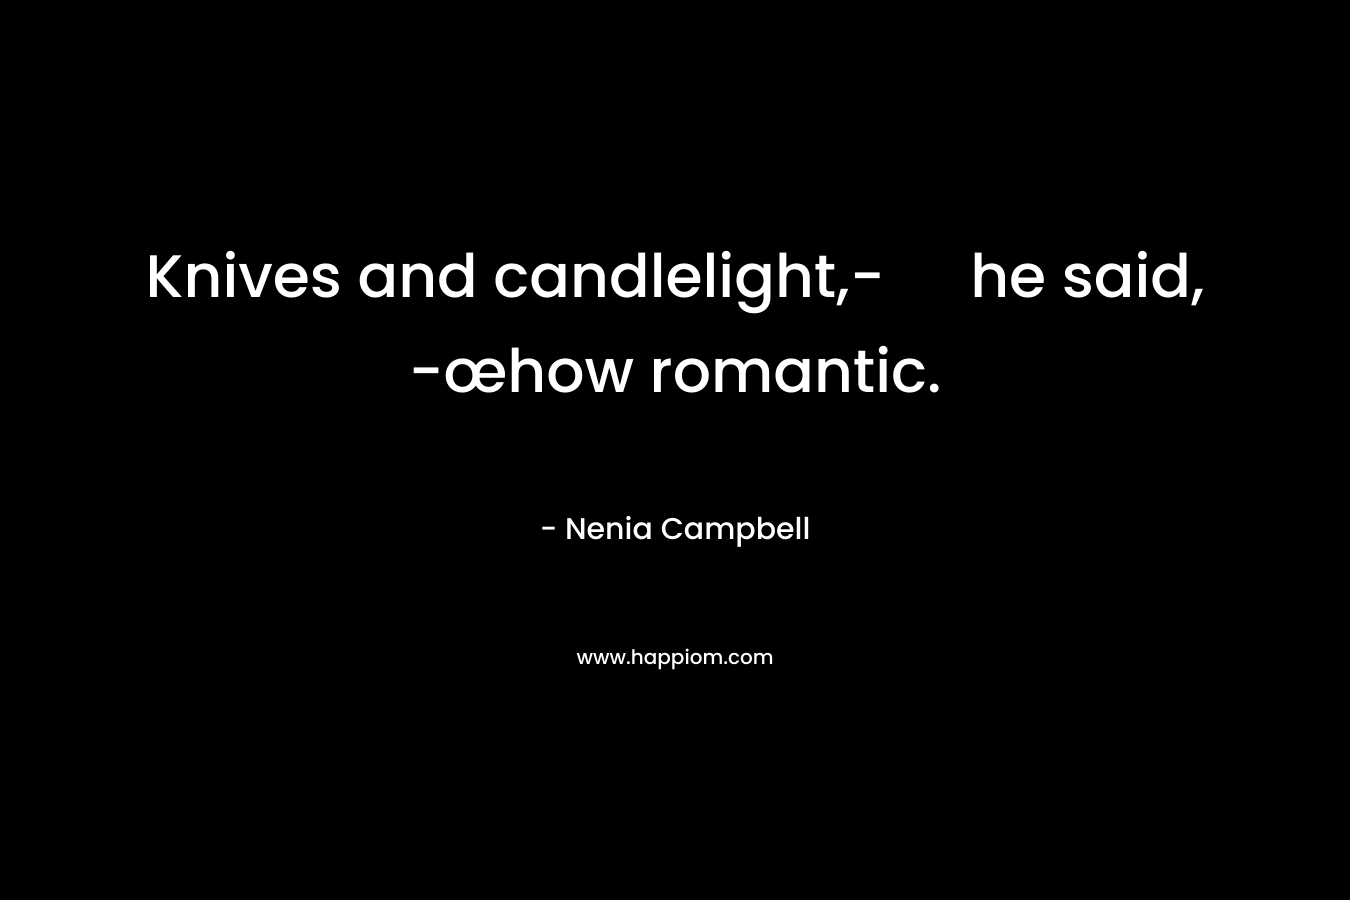 Knives and candlelight,- he said, -œhow romantic. – Nenia Campbell